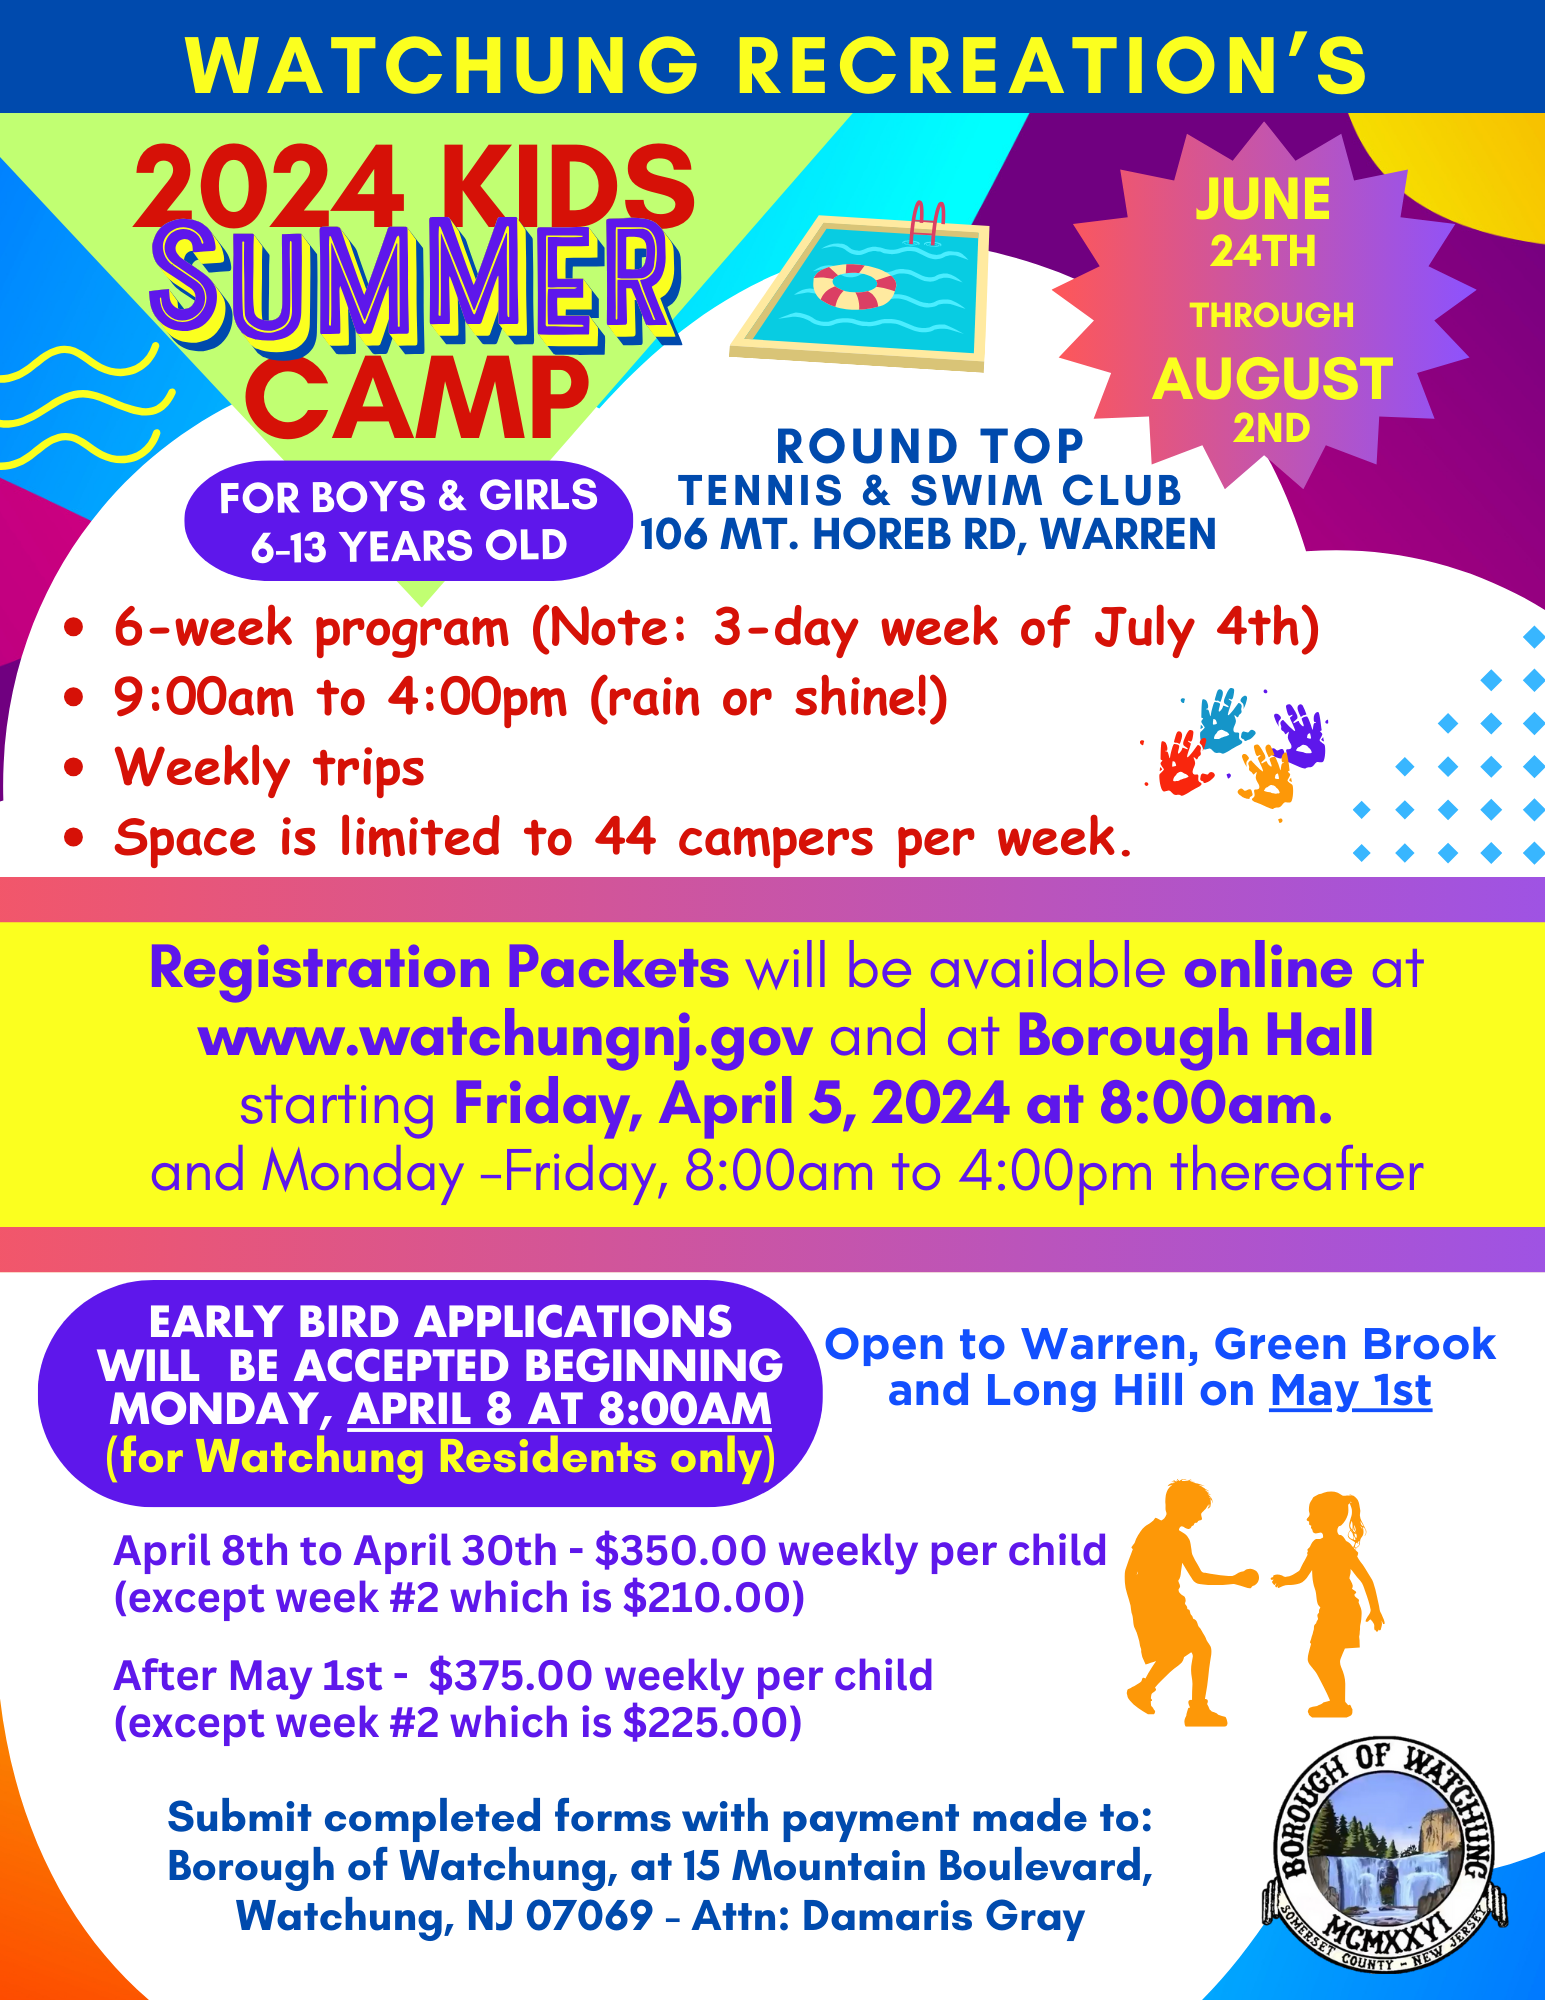 Colorful summer camp flyer with informational text about the program